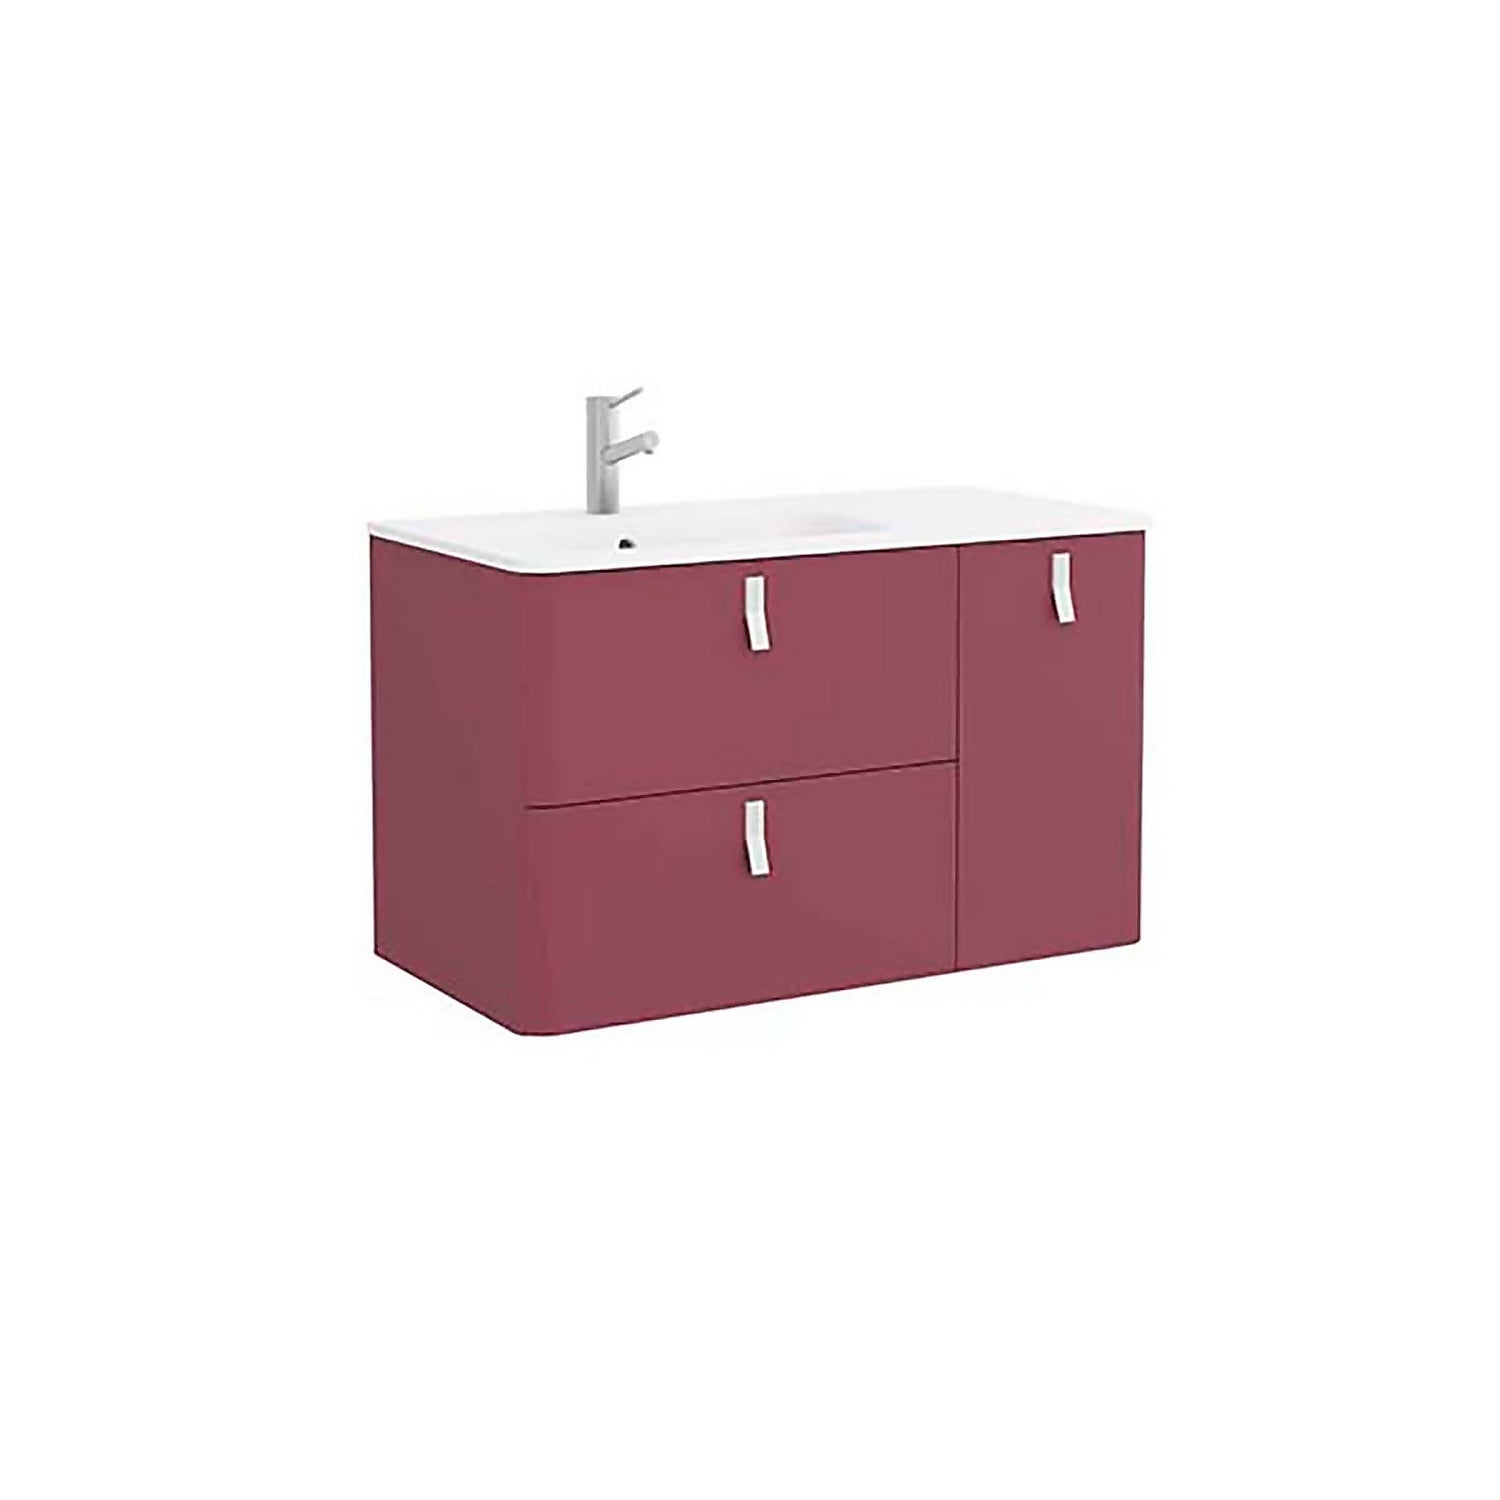 Sketch 900mm Right Hand Inset Basin and Unit - Pomegranate Red